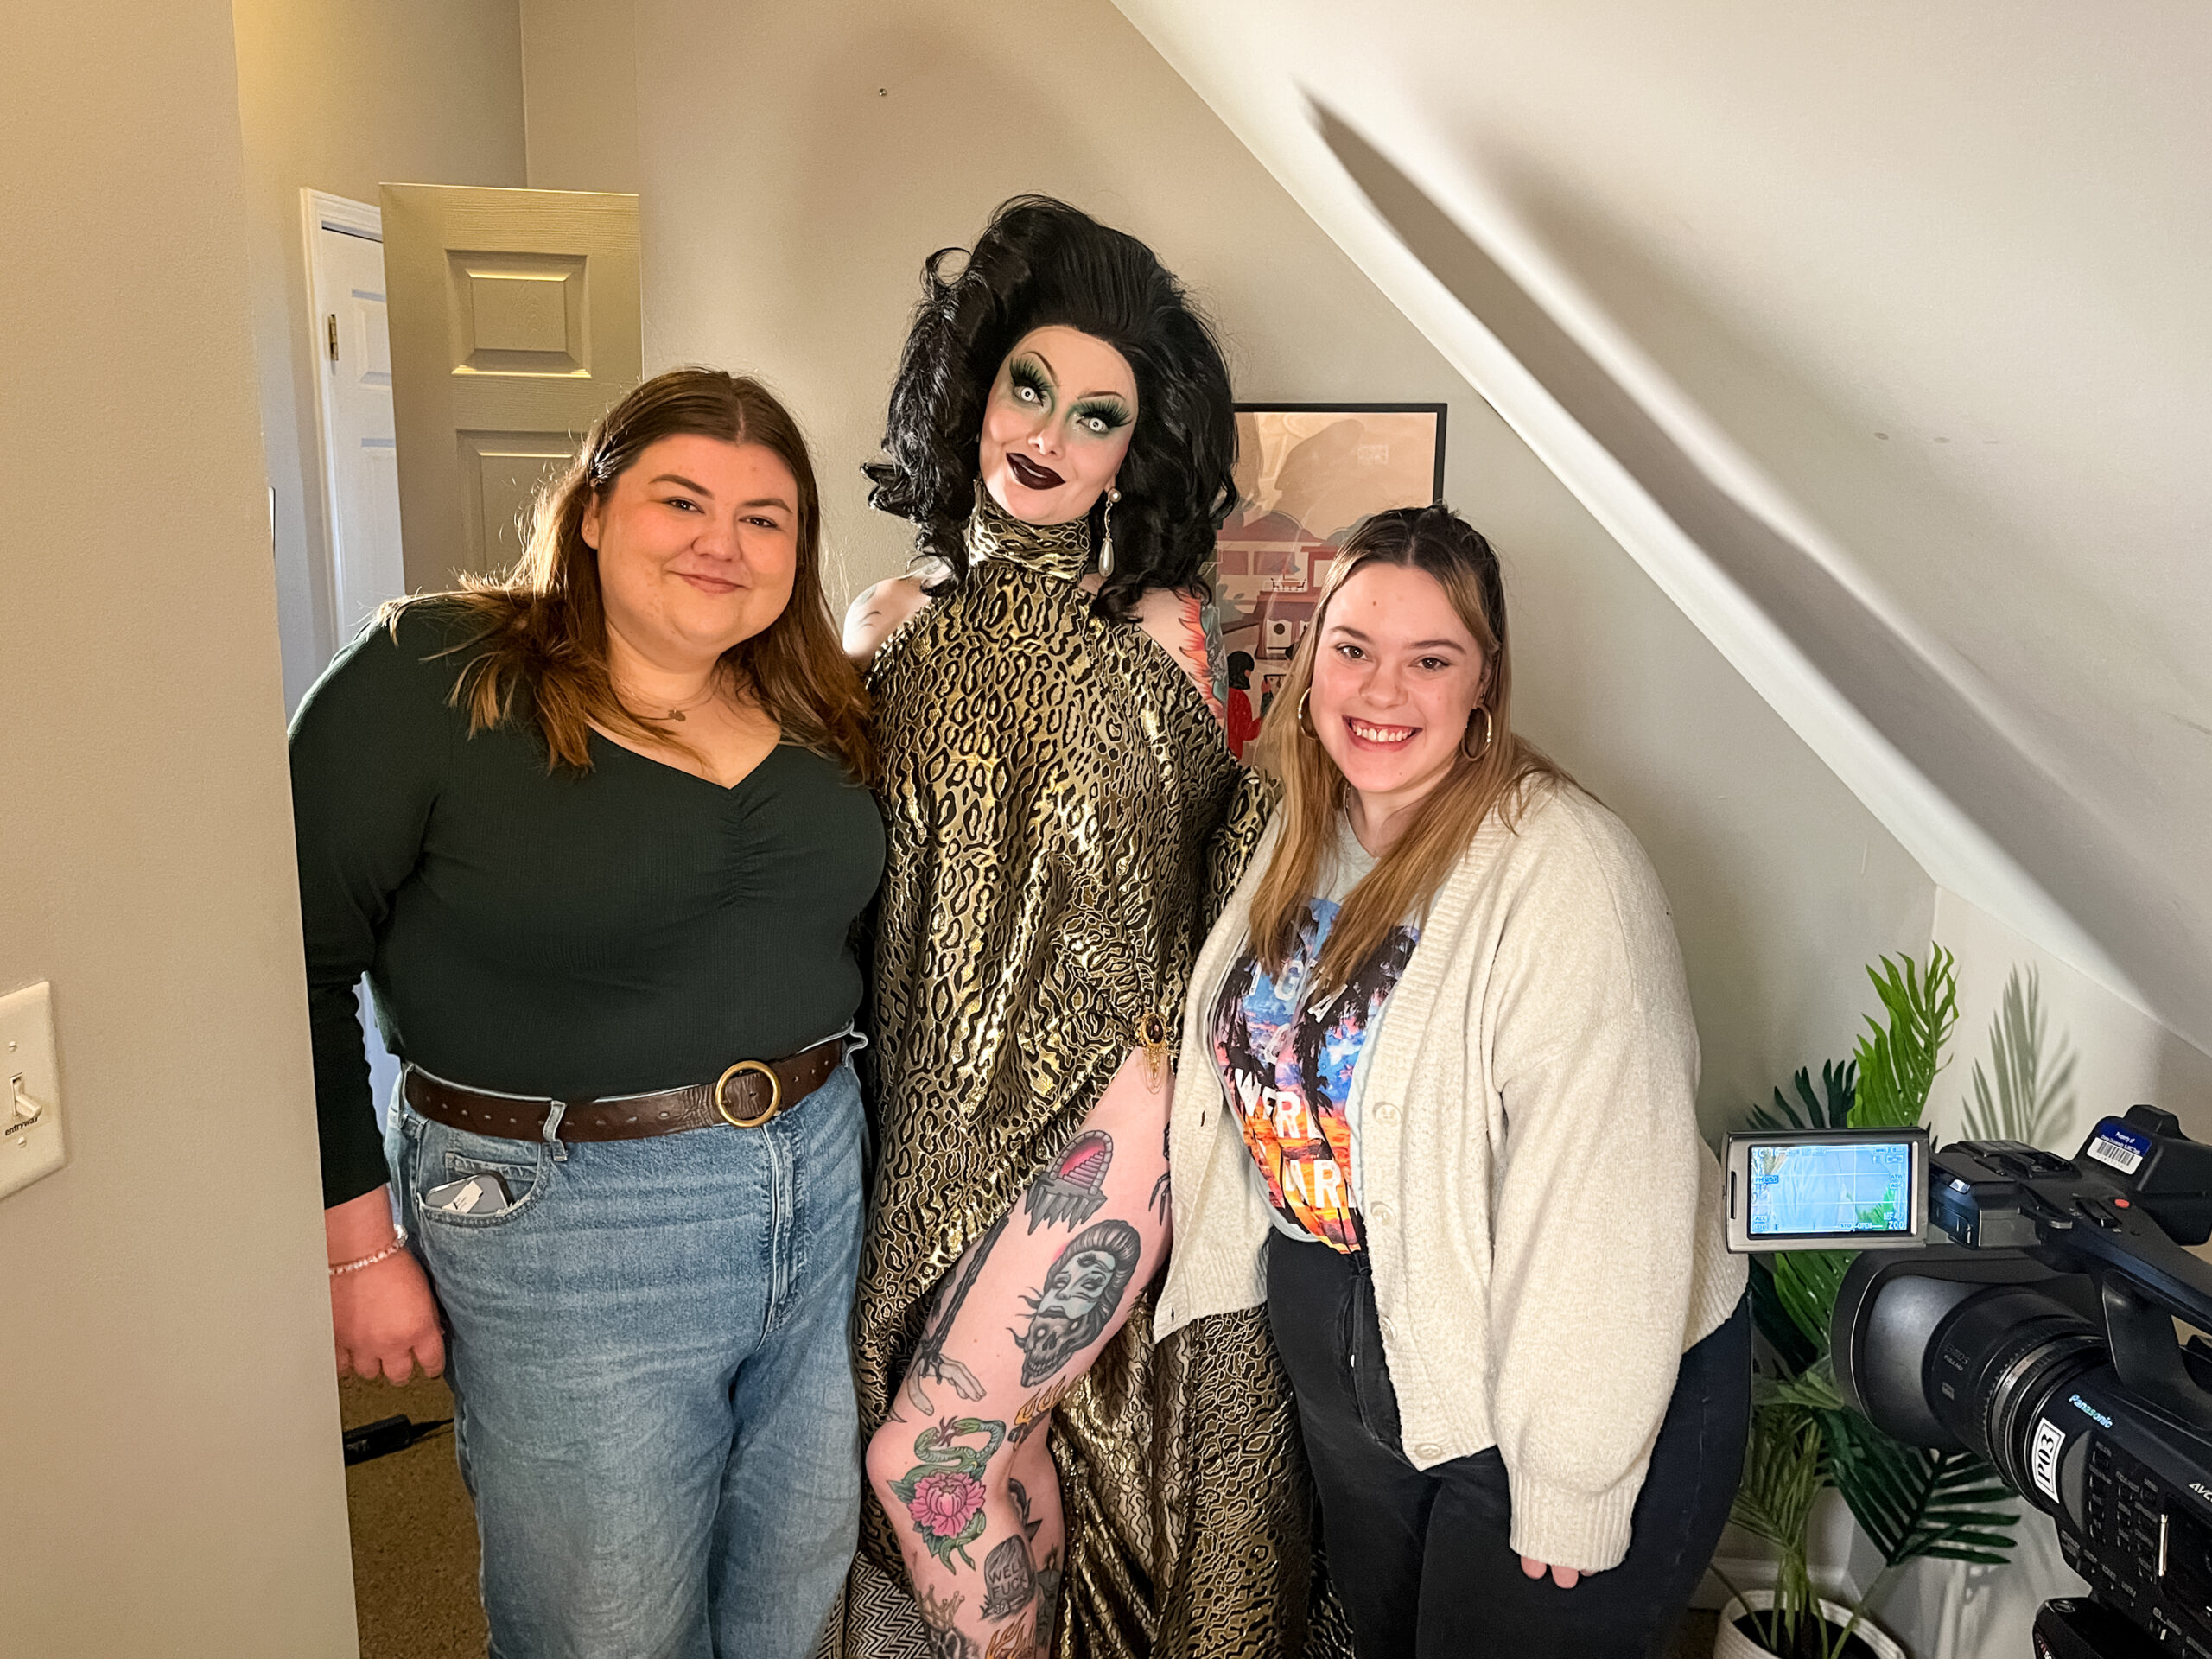 Urban Plains staff members Kathryn Pagel and Natalie Novak stand with Sigourney Beaver, who is dressed in full drag.